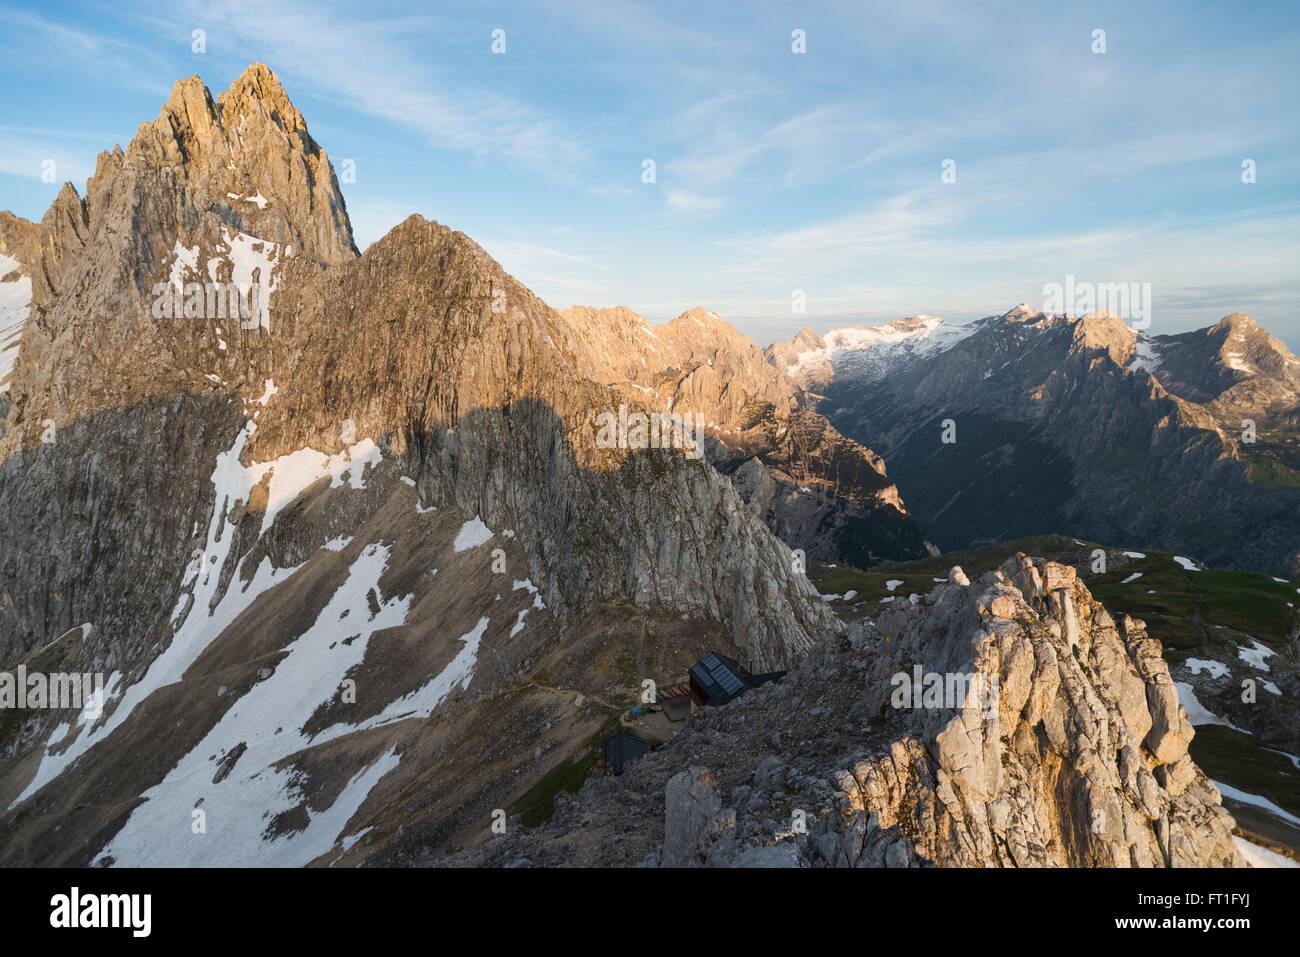 The Meilerhuette mountain hut at Mount Partenkirchner Dreitorspitze with Mount Alpspitze and Mount Zugspitze behind at sunrise Stock Photo